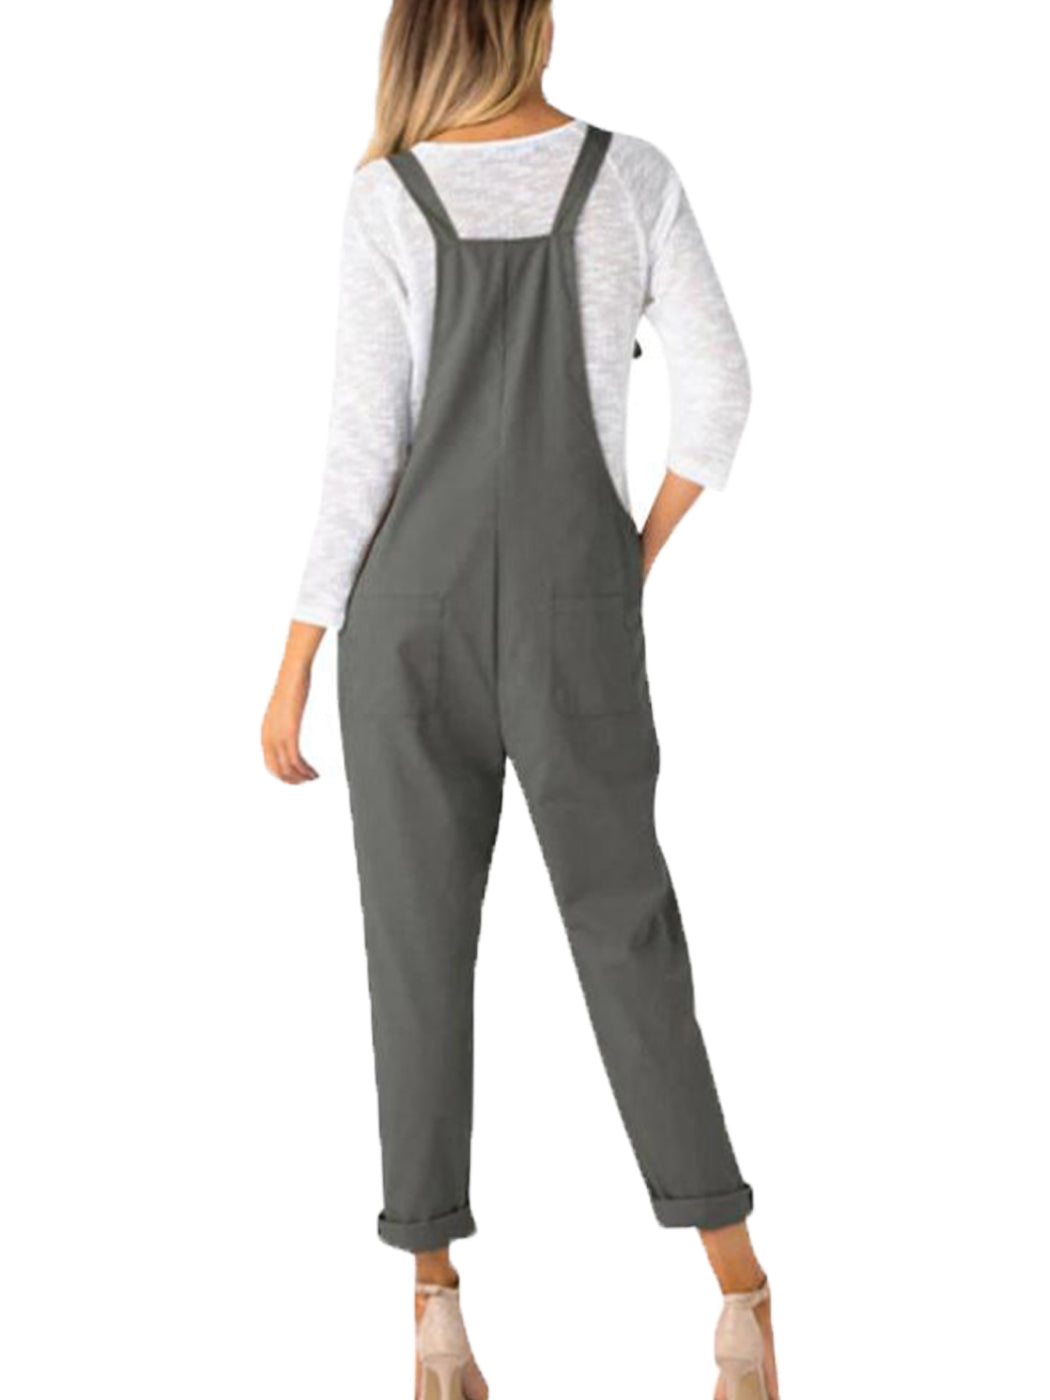 Corduroy Front Cropped Leg Overalls